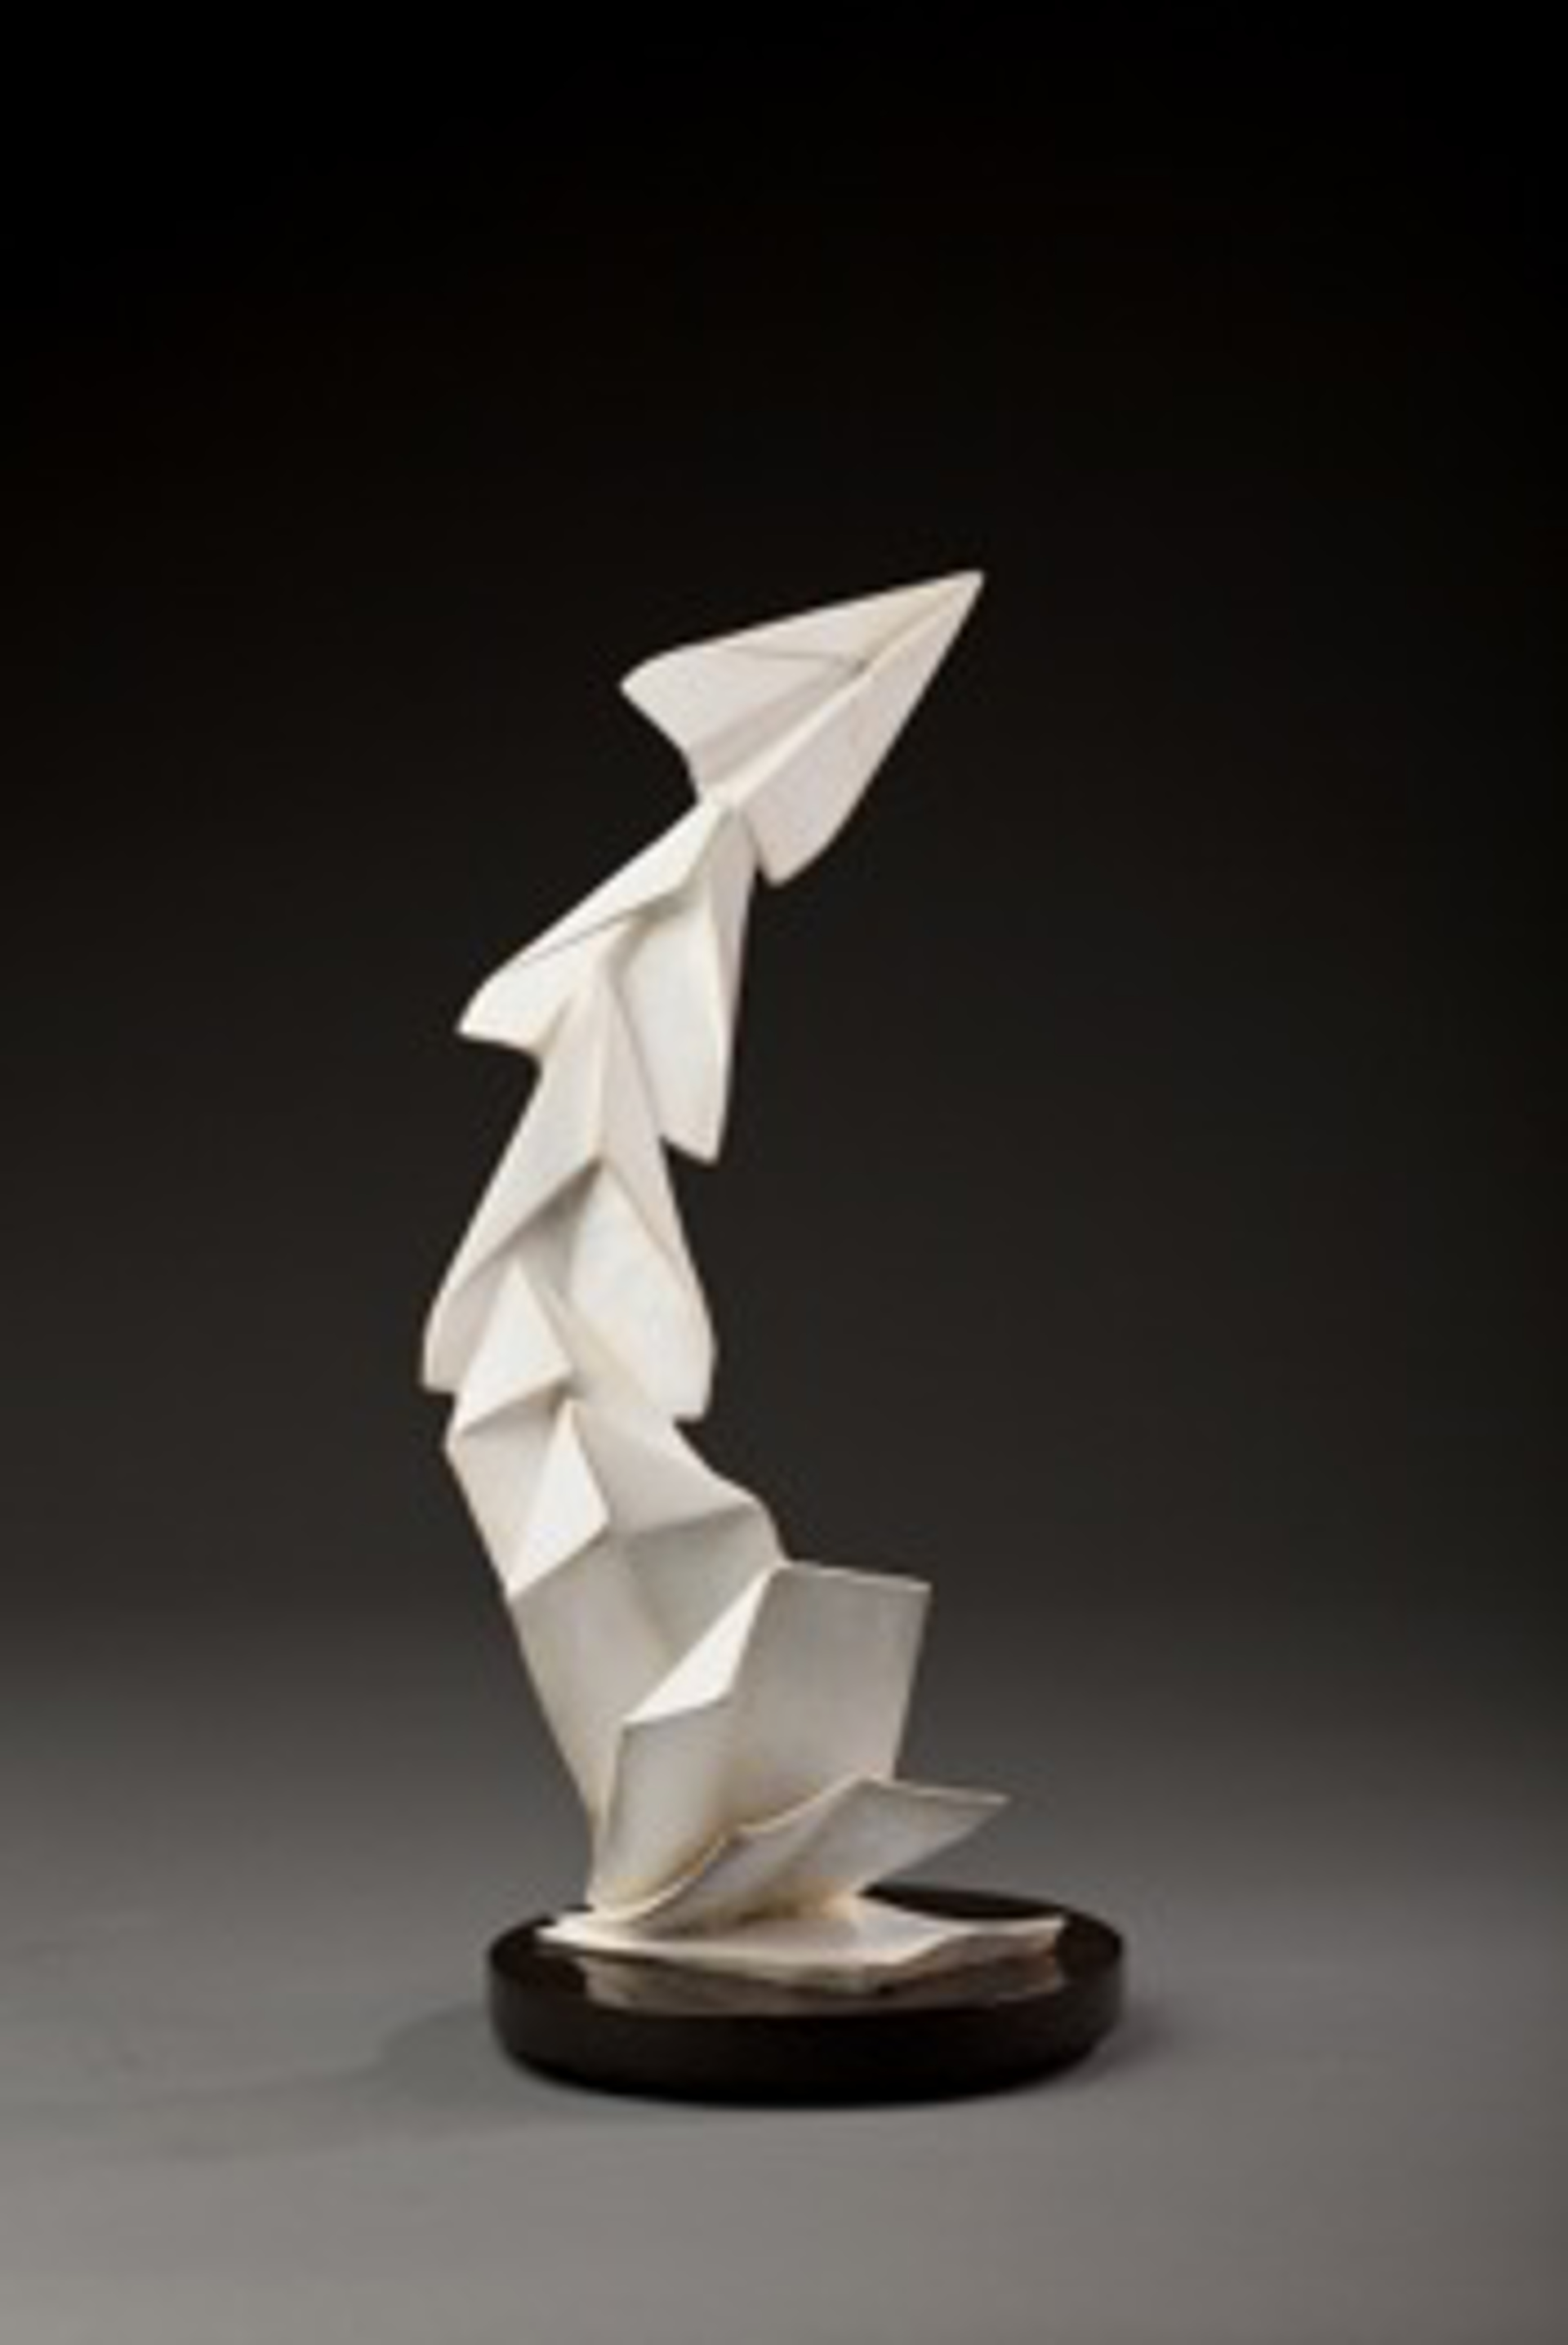 Folding Planes (Maquette) by Kevin Box